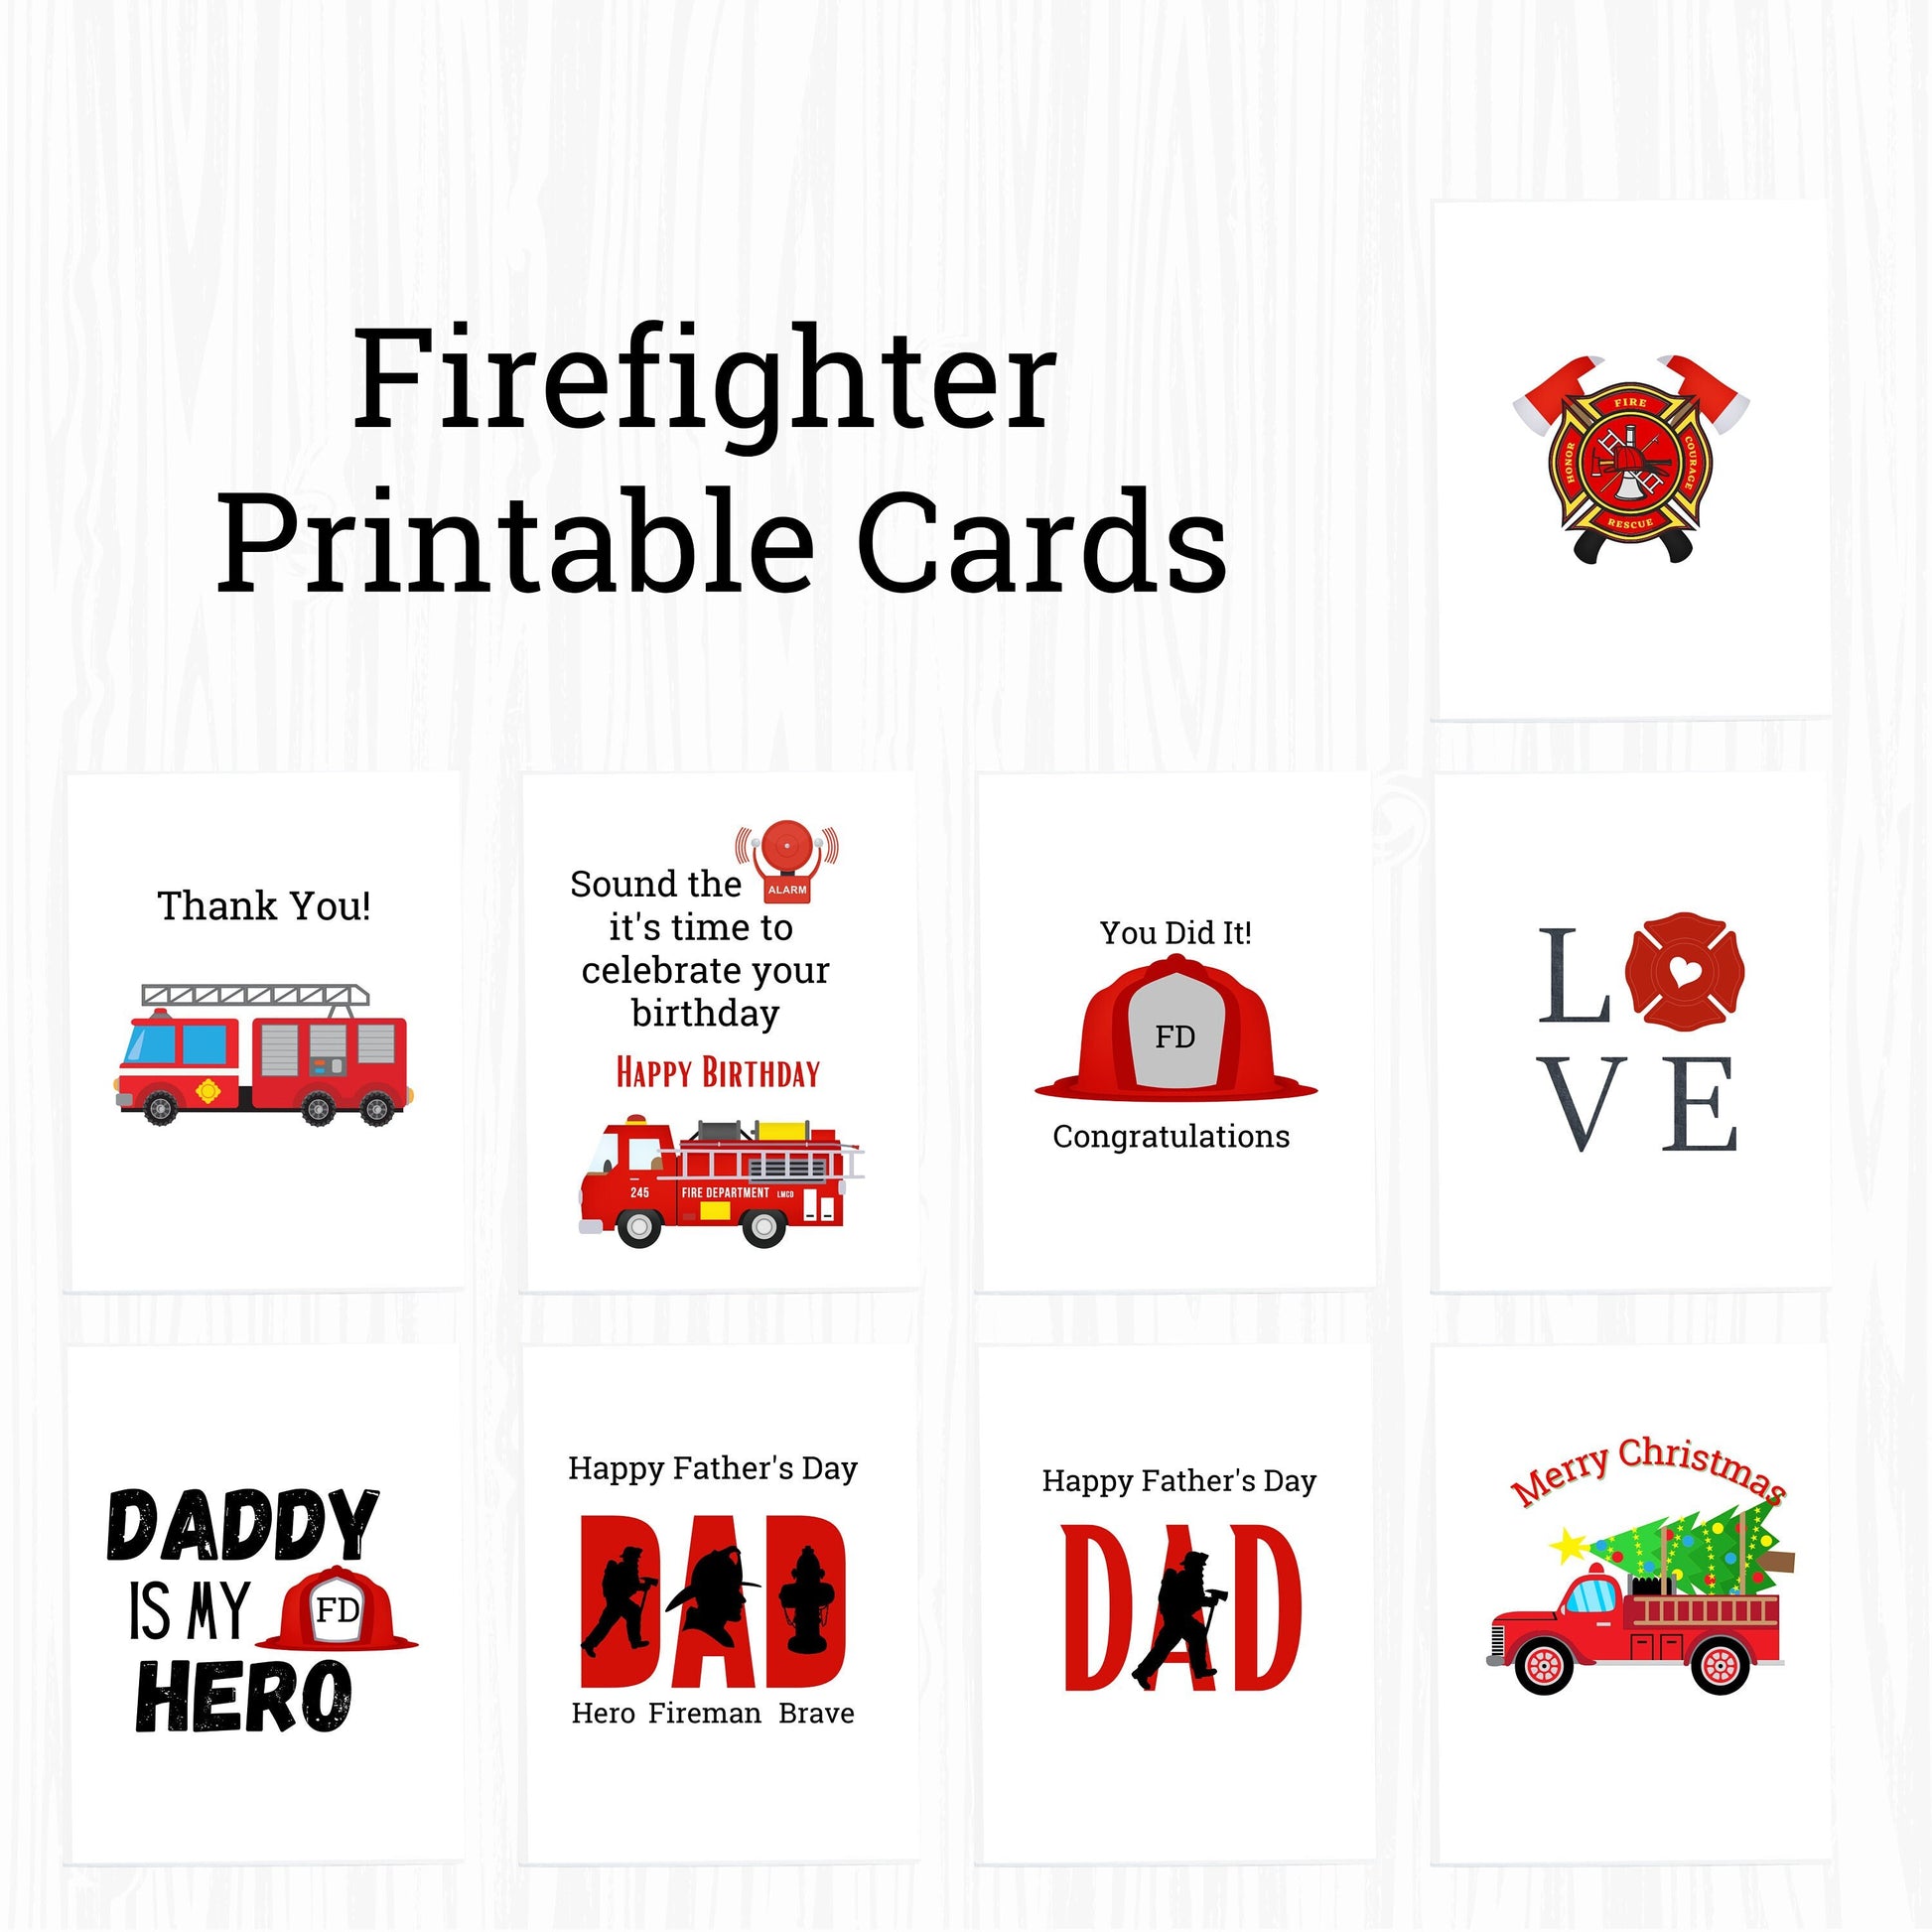 9 Firefighter PRINTABLE Cards, Christmas Card, Anniversary Card, Thank you Card, Graduation Card Set, Fireman card set, INSTANT DOWNLOAD